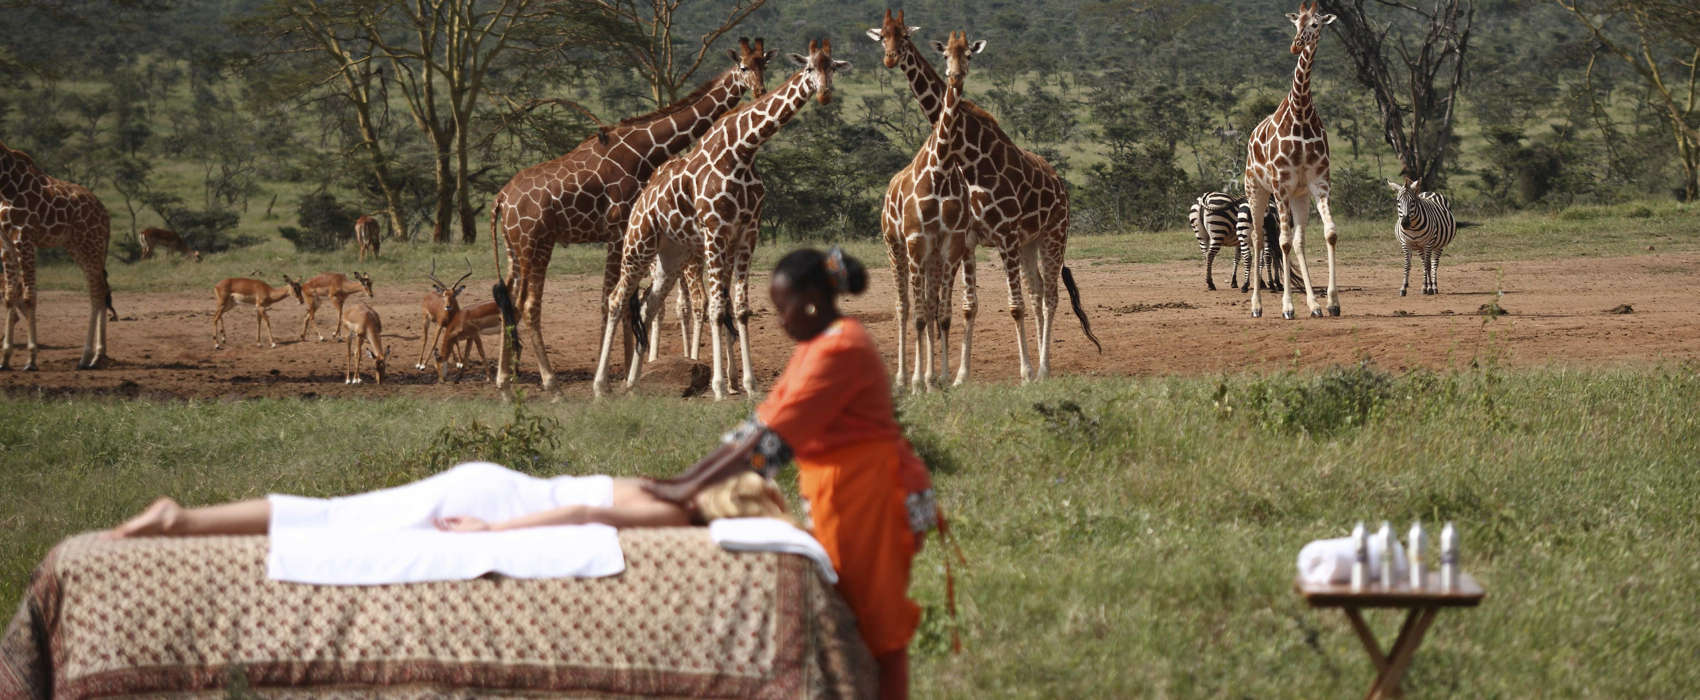 african safaris for relaxation and wellness